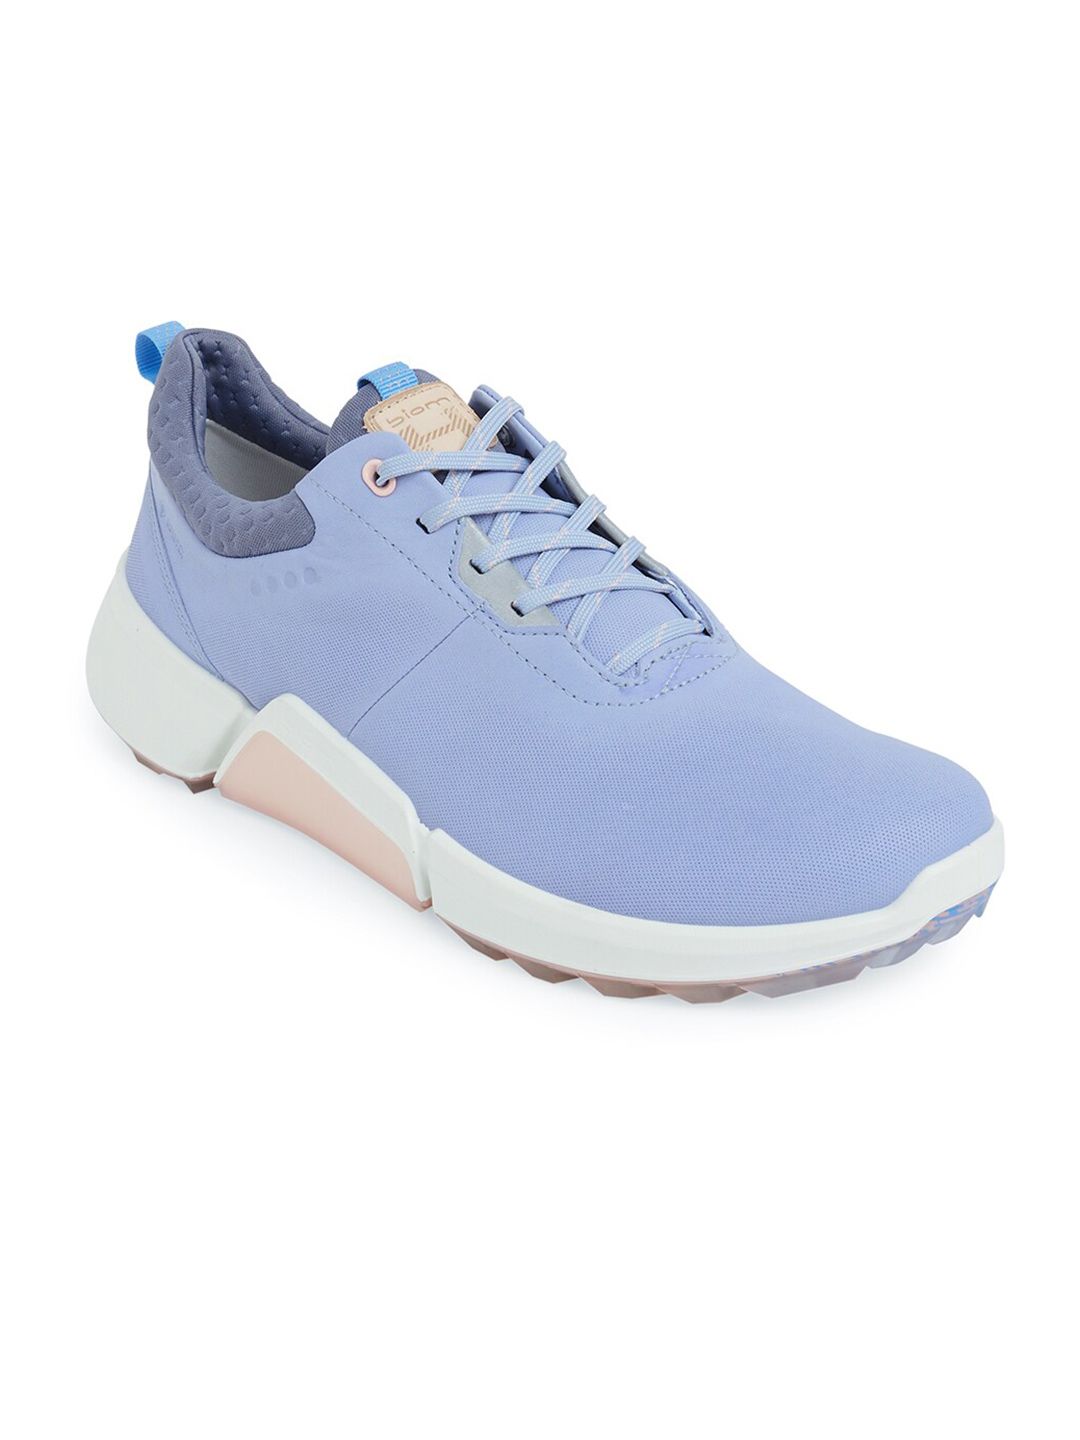 ECCO Women Blue Hybrid Performance Leather Golf Non-Marking Shoes Price in India